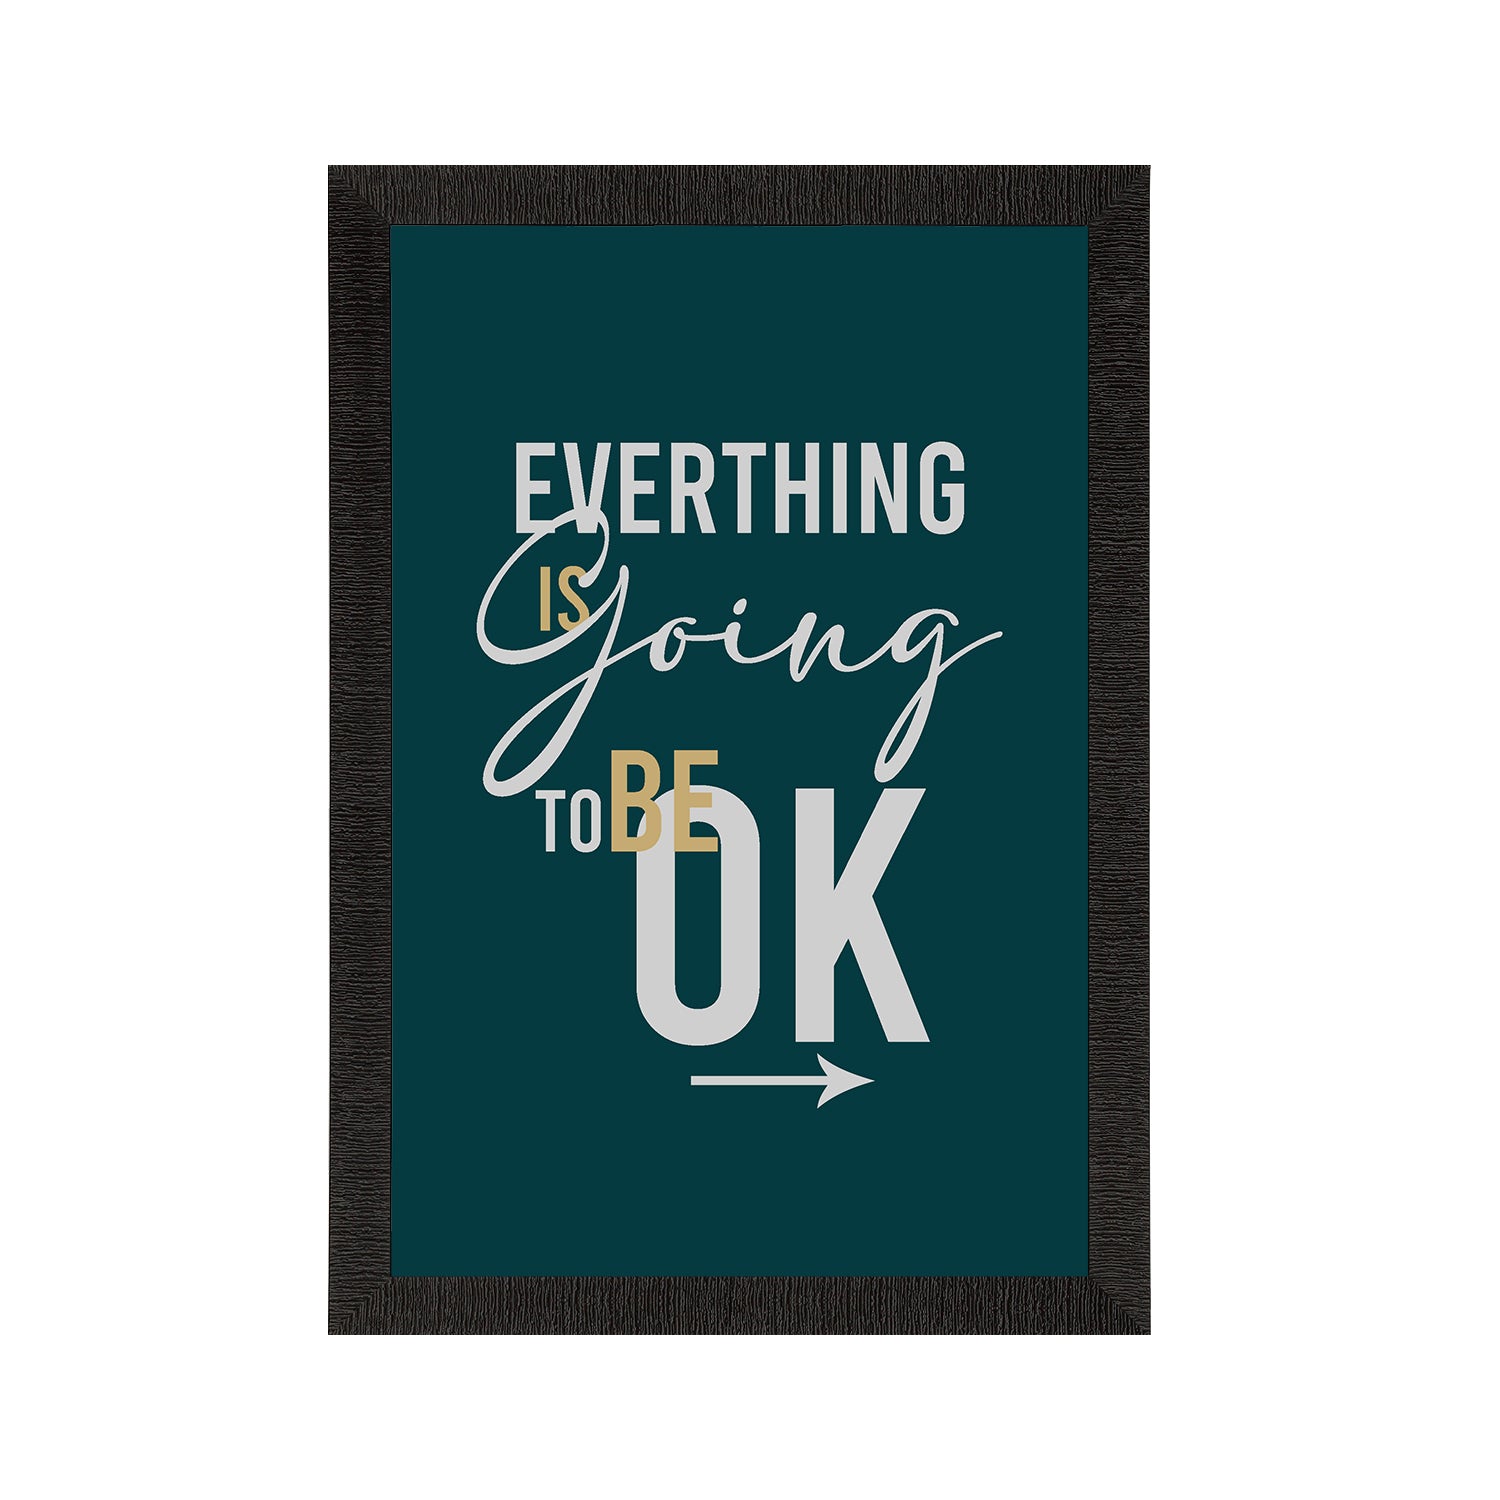 "Everything is going to be OK" Motivational Quote Satin Matt Texture UV Art Painting